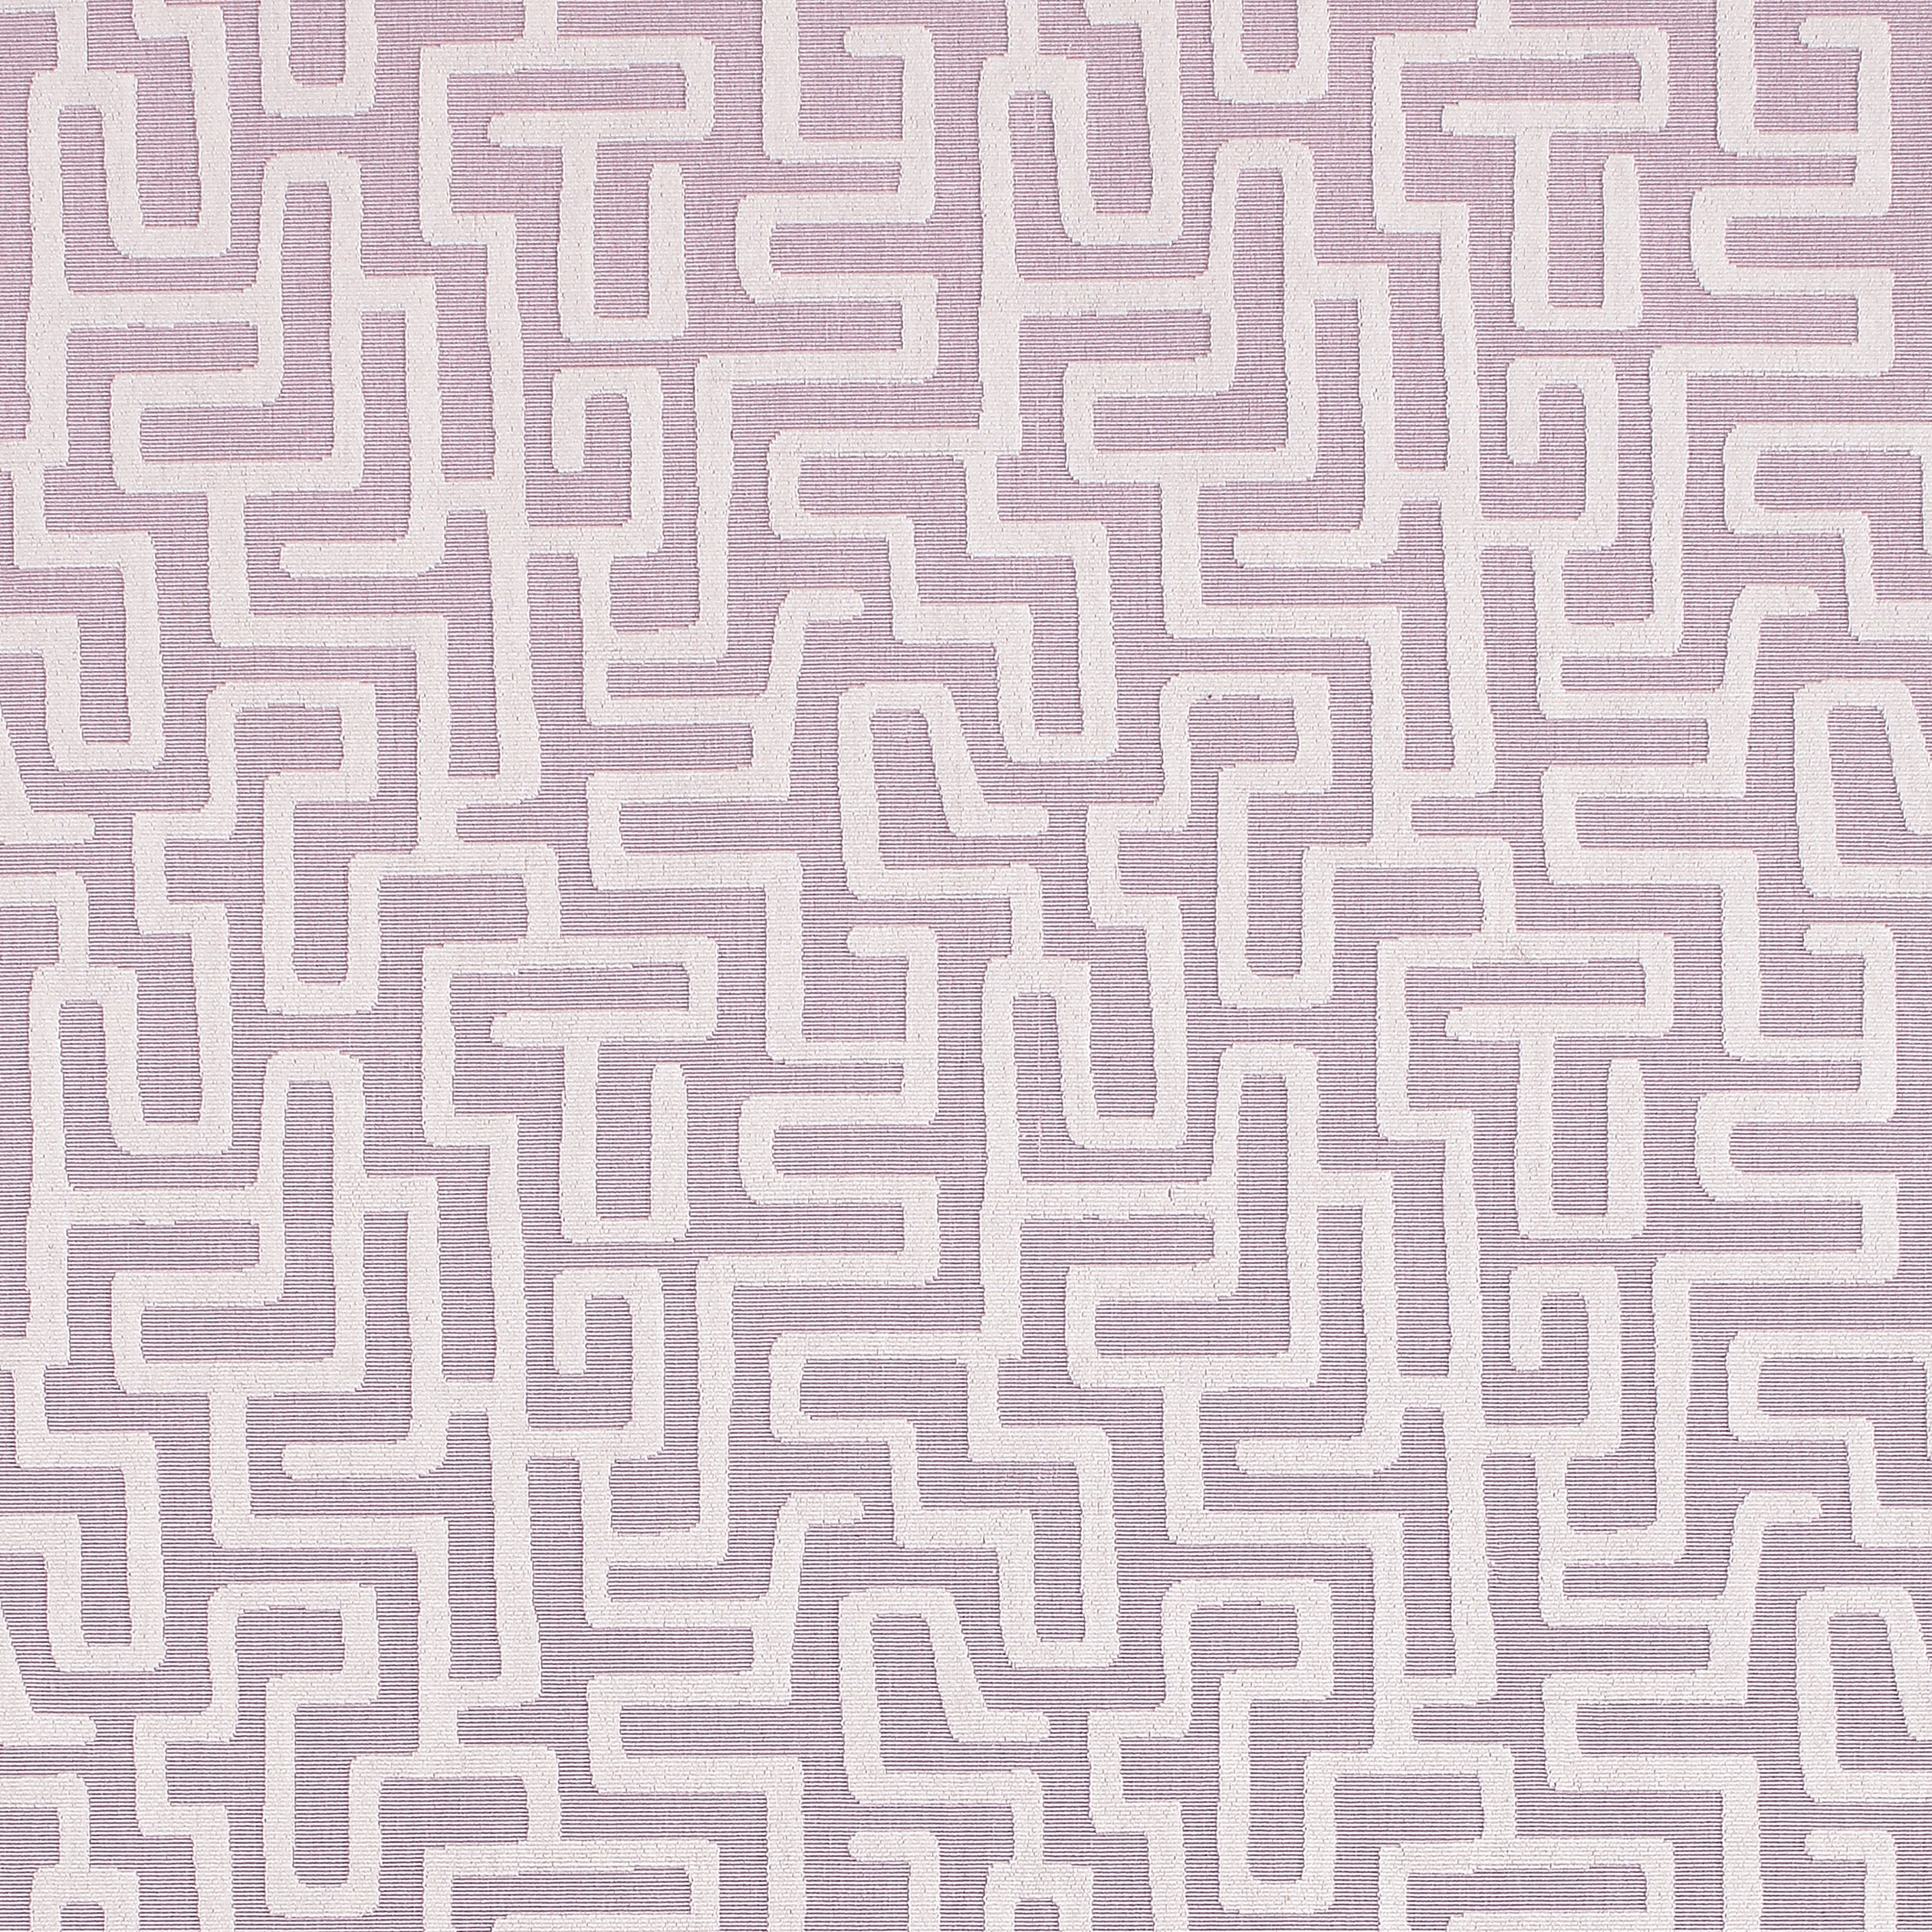 Terrace Lane fabric in lavender color - pattern number W742027 - by Thibaut in the Sojourn collection